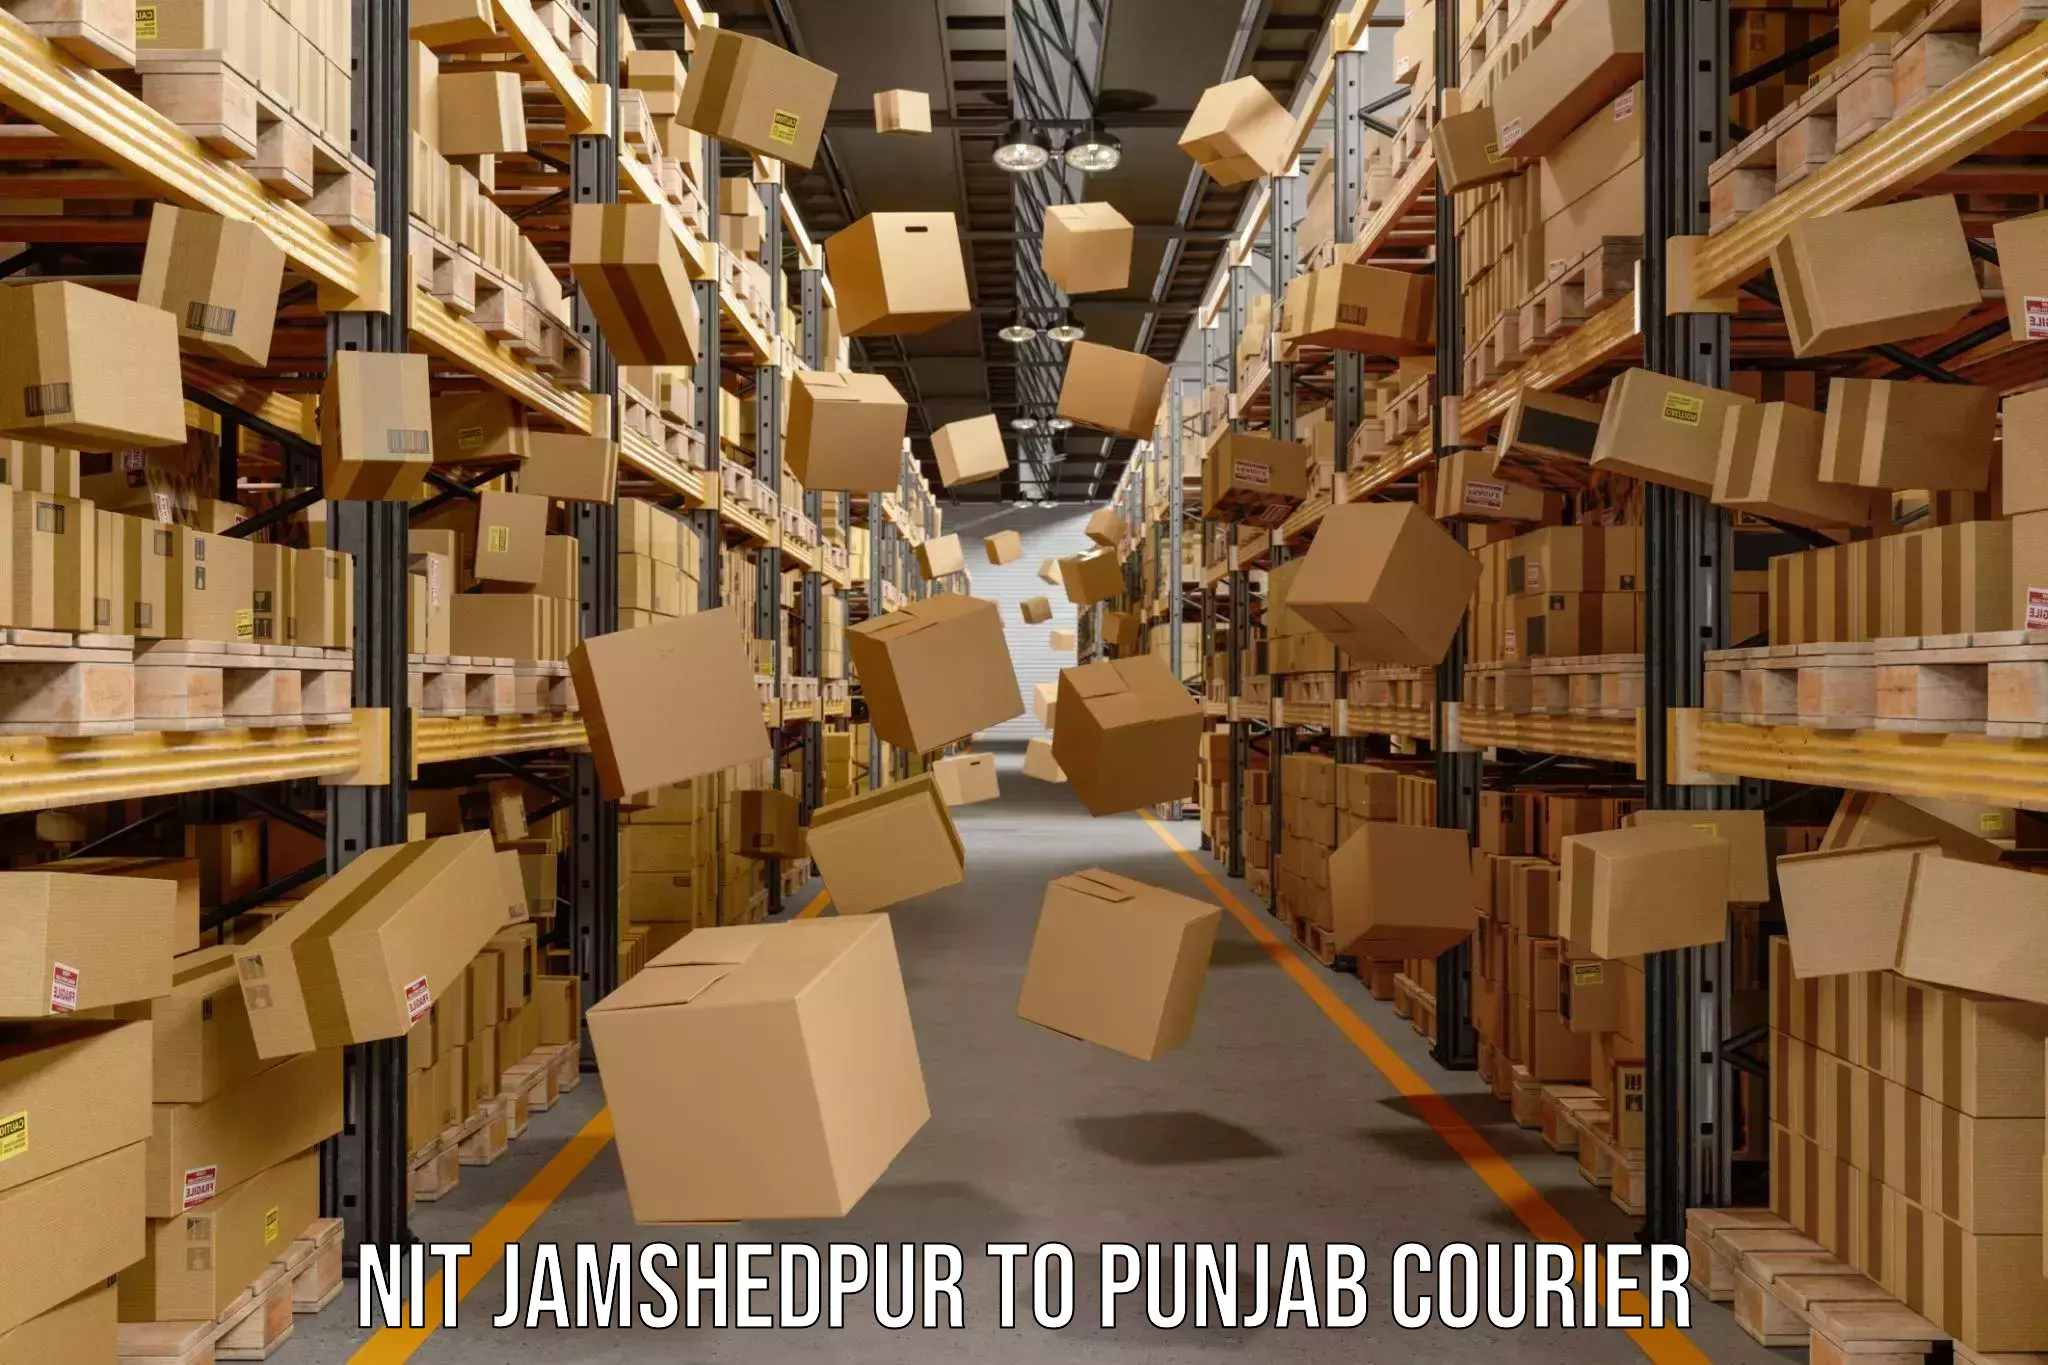 Personal courier services NIT Jamshedpur to Ludhiana